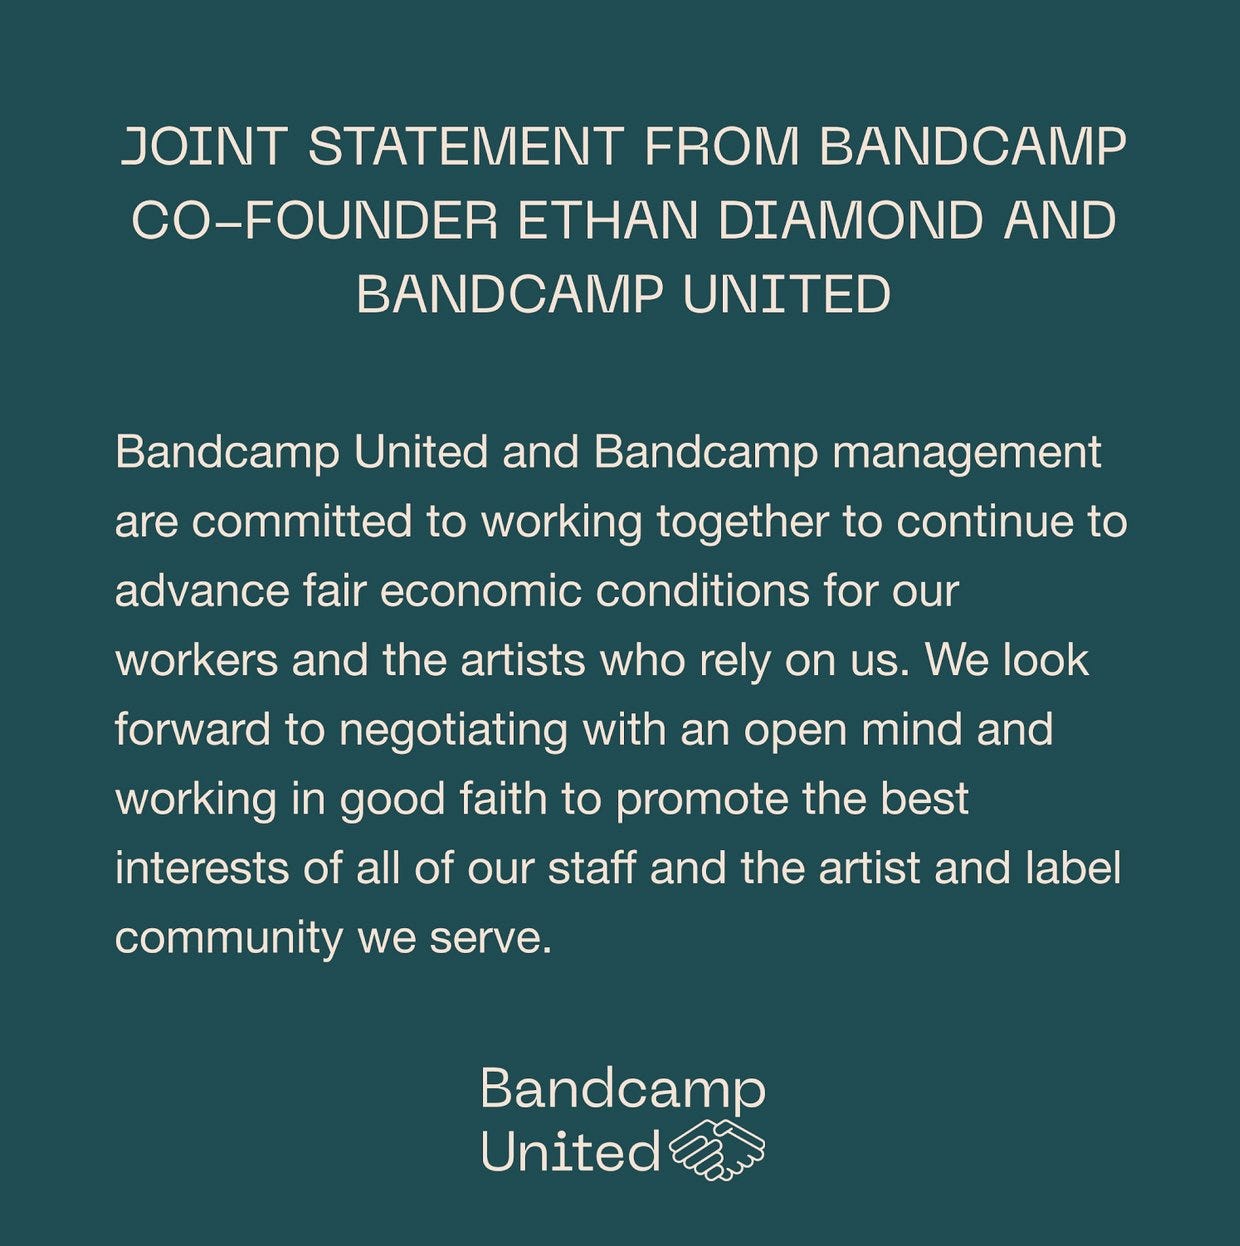 A graphic that reads: "Joint Statement From Bandcamp Co-Founder Ethan Diamond and Bandcamp United. Bandcamp United and Bandcamp management are committed to working together to continue to advance fair economic conditions for our workers and the artists who rely on us. We look forward to negotiating with an open mind and working in good faith to promote the best interests of all of our staff and the artist and label community we serve."